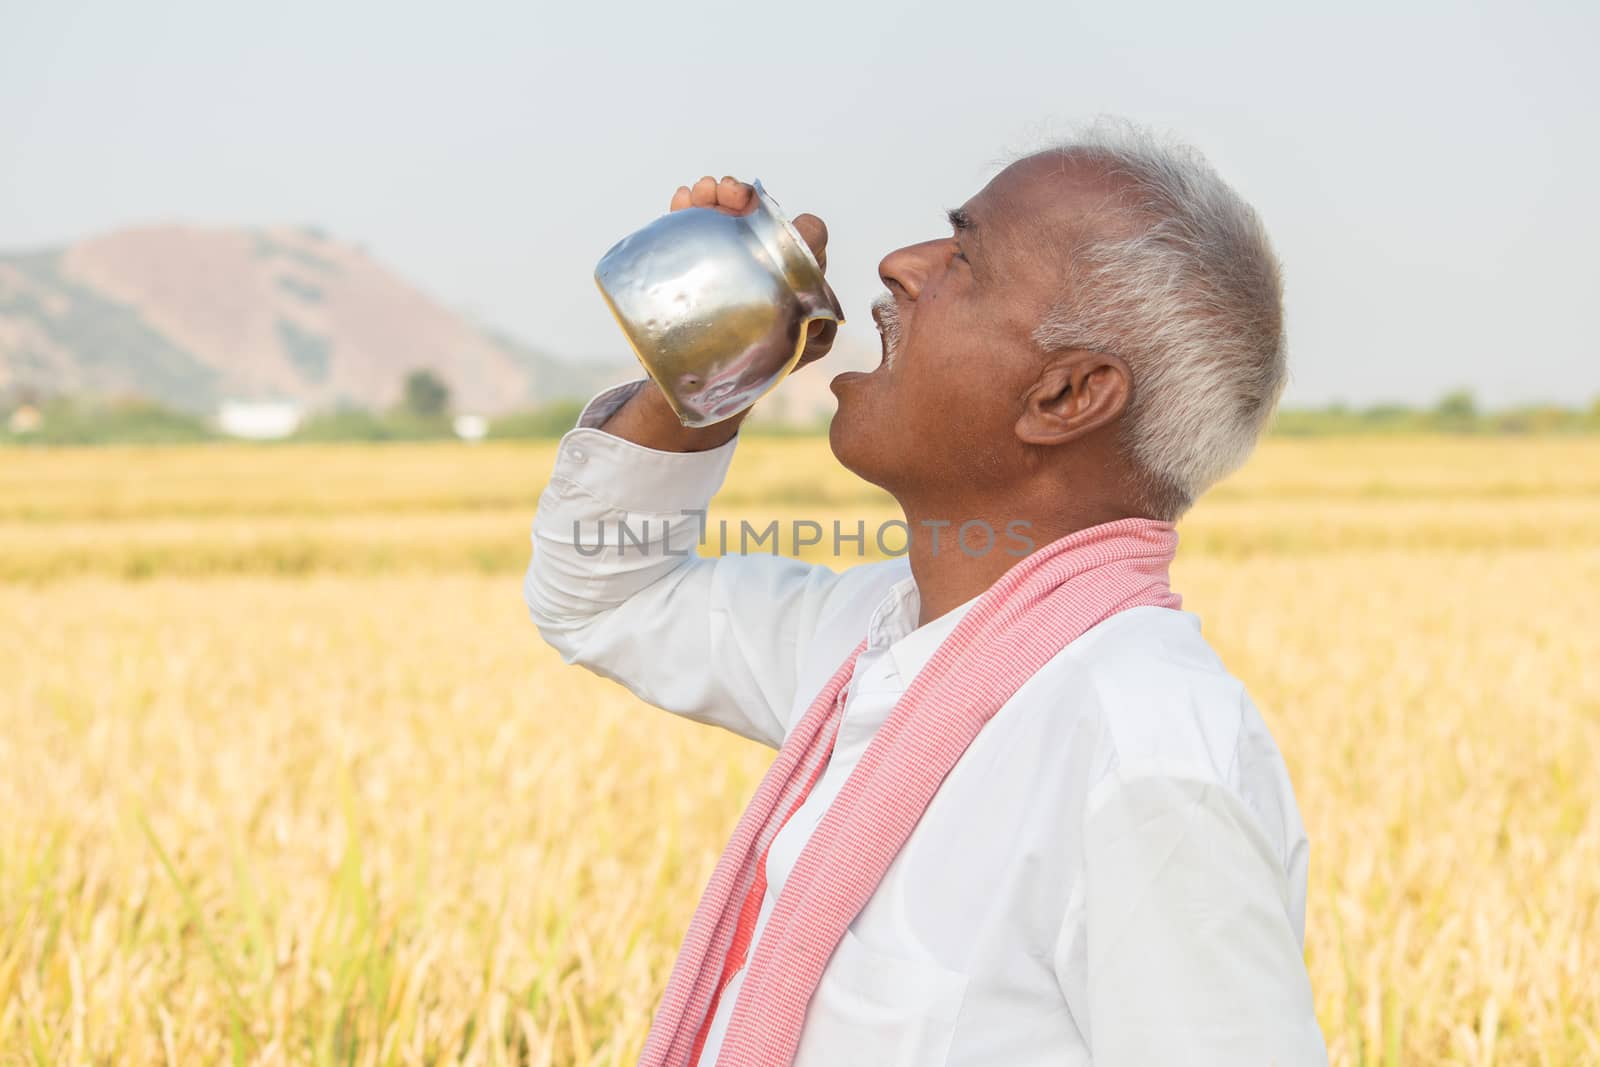 Thirsty Indian farmer drinking water from steel tumbler or Chambu on hot sunny day at agriculture field by lakshmiprasad.maski@gmai.com